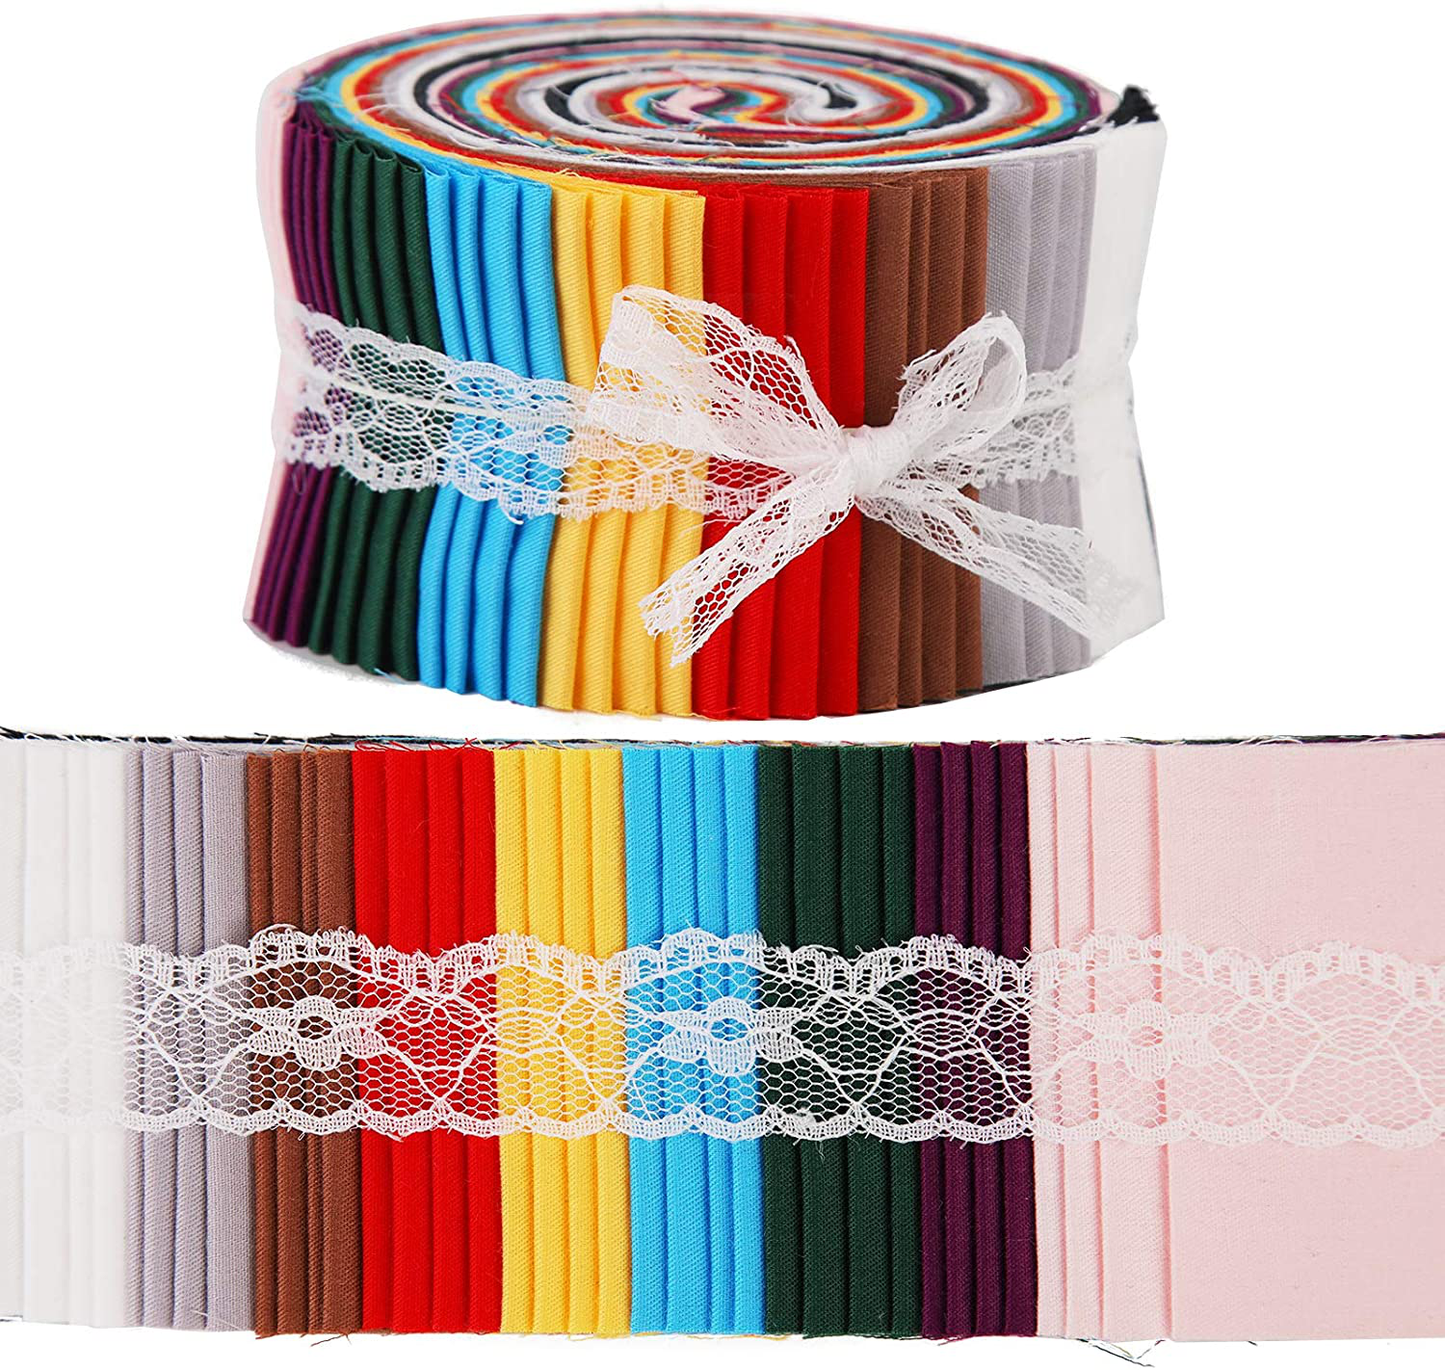 Jelly Rolls for Quilting, Pre-Cut Jelly Roll Fabric in Vivid Colors, Jelly Roll Fabric Strips for Quilting, Jelly Rolls for Quilting Clearance, Fabric Jelly Rolls with Different Patterns